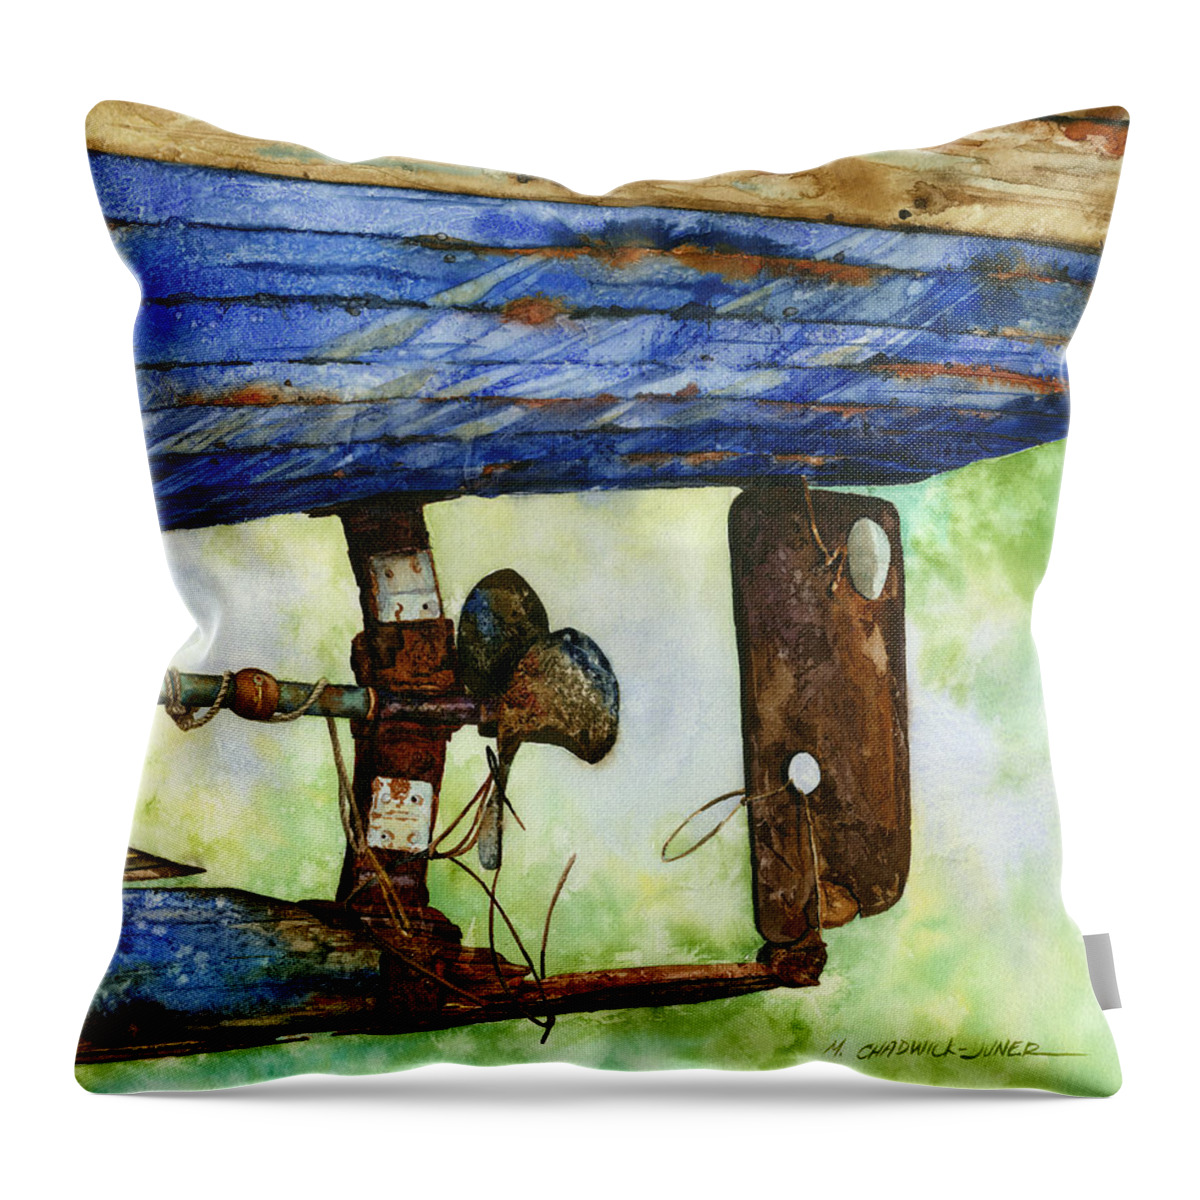 Boat Throw Pillow featuring the painting Waiting for Russel by Marguerite Chadwick-Juner